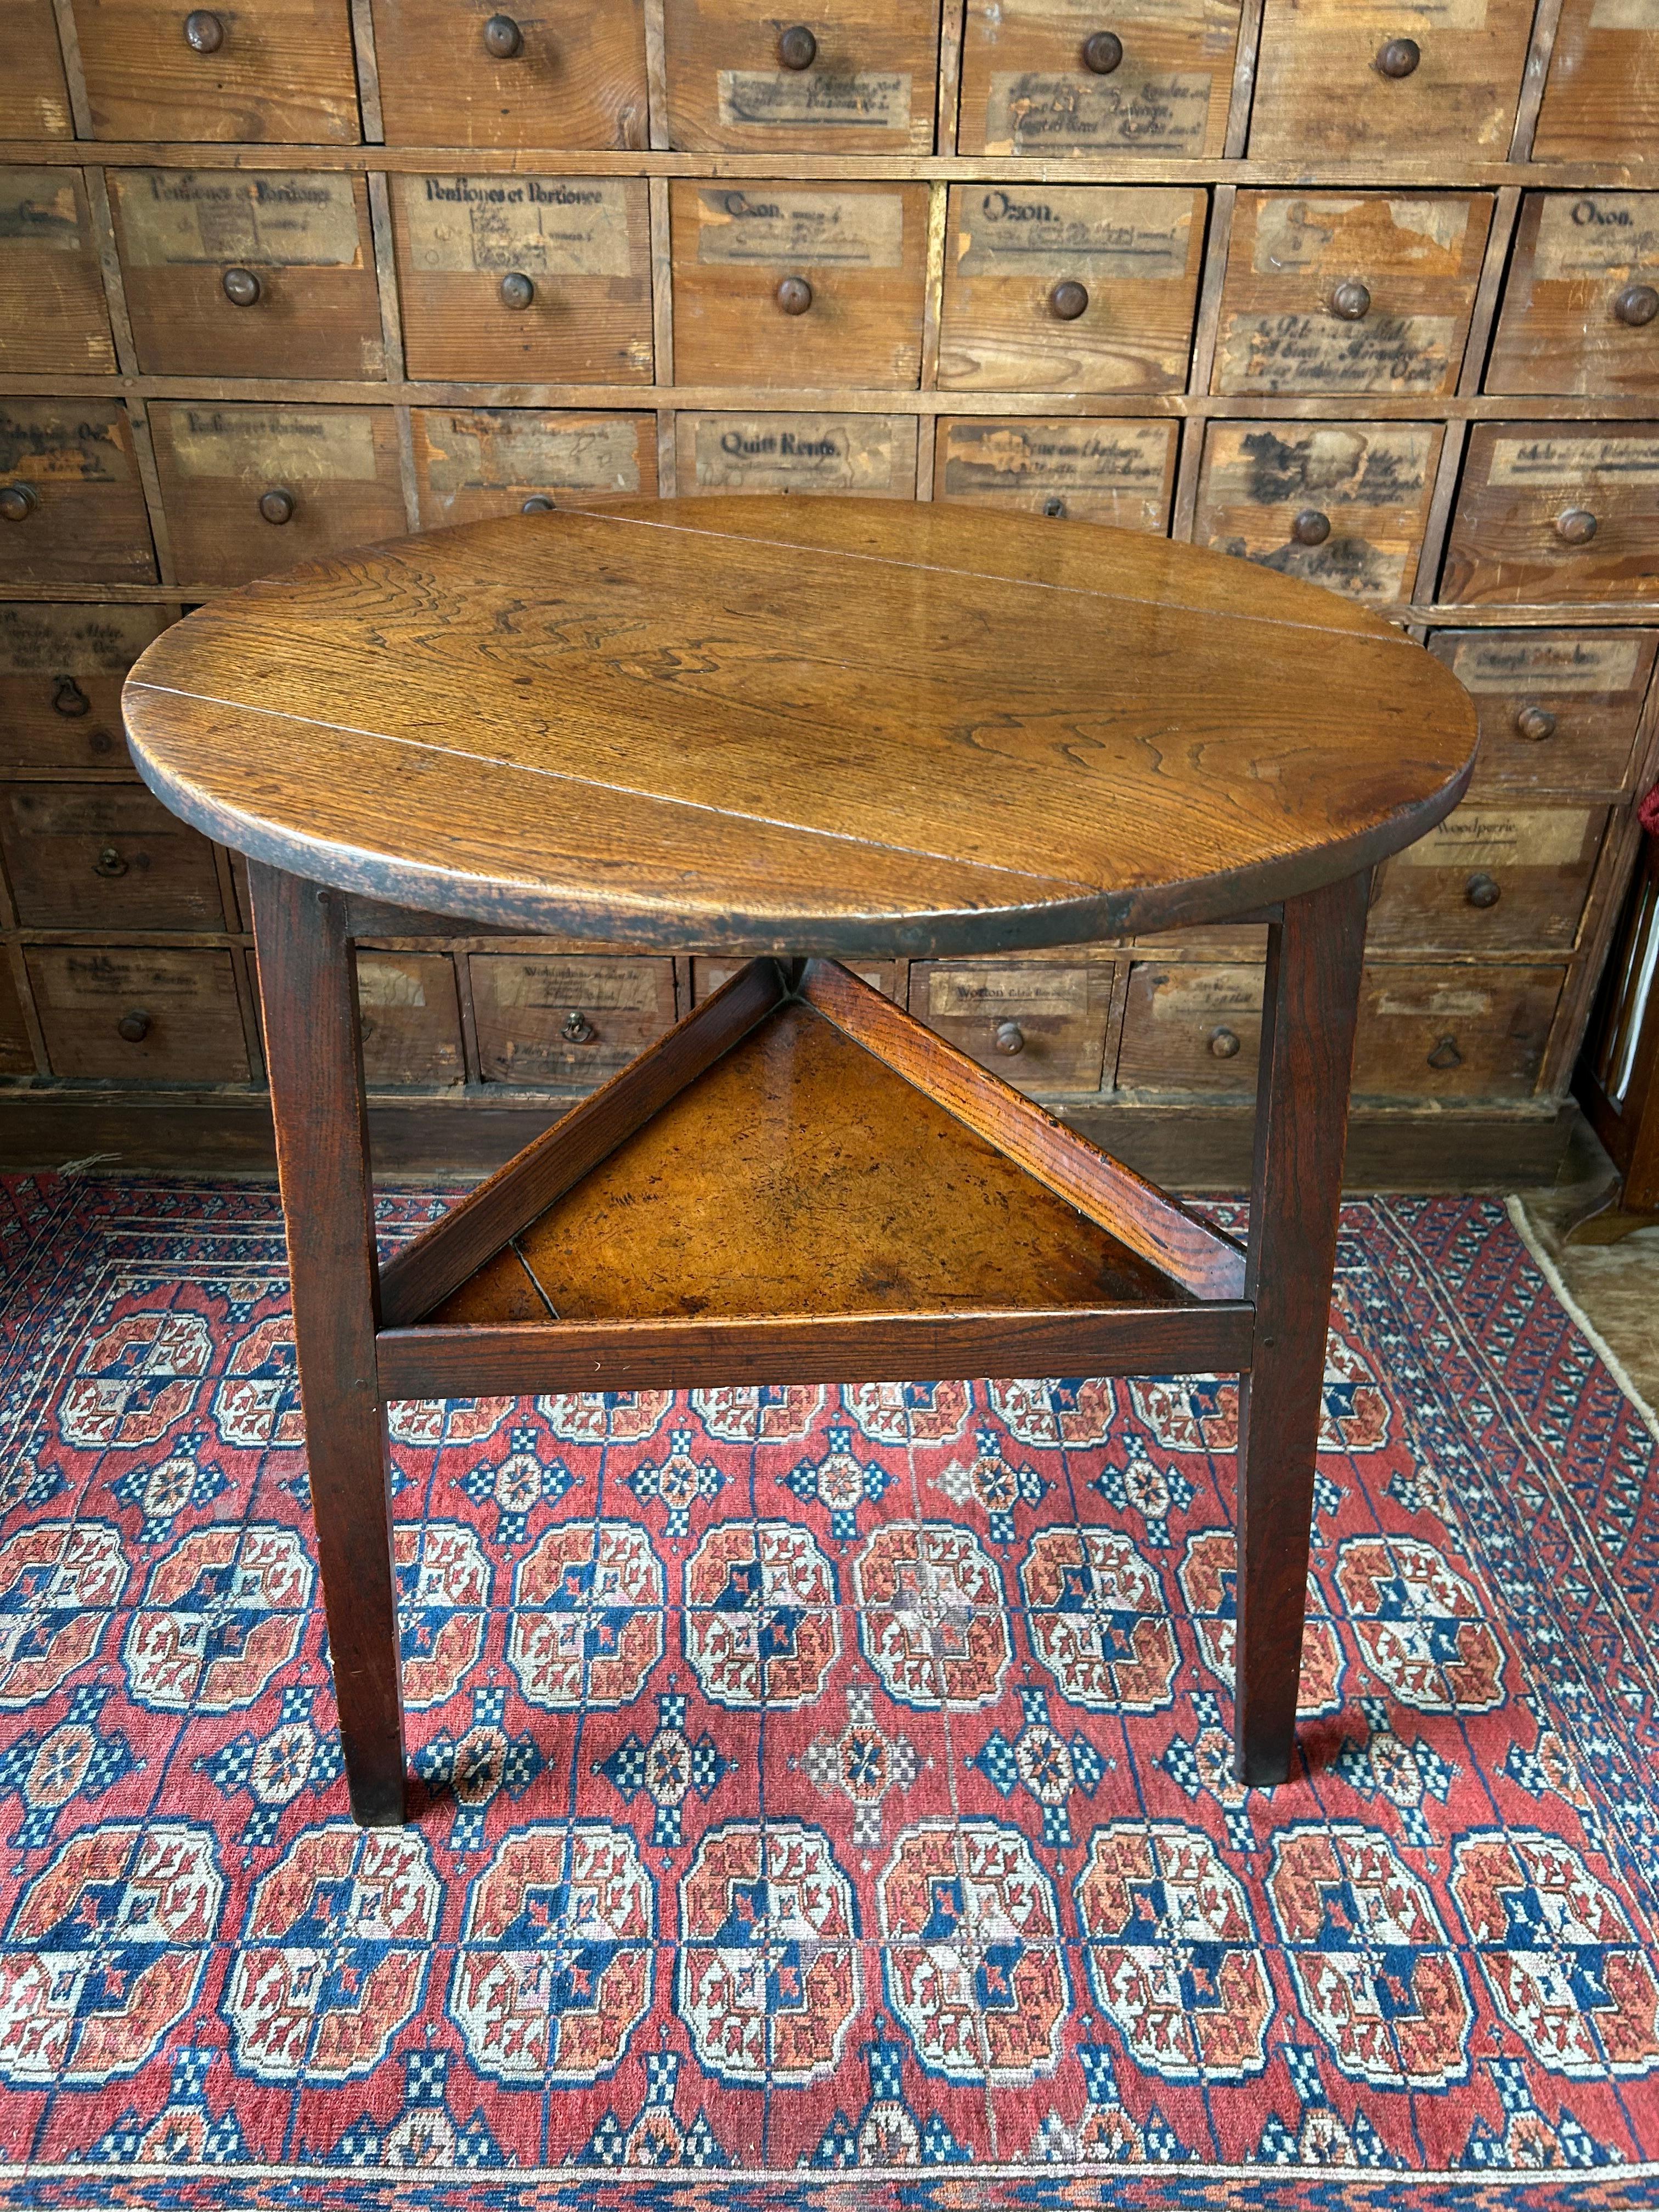 An attractive English Late 18th century Elm and fruitwood cricket table. The three plank elm top rests on a diamond freize, with three slightly splayed legs connected to a lower tier shelf with an angled gallery. The lower shelf base is made from